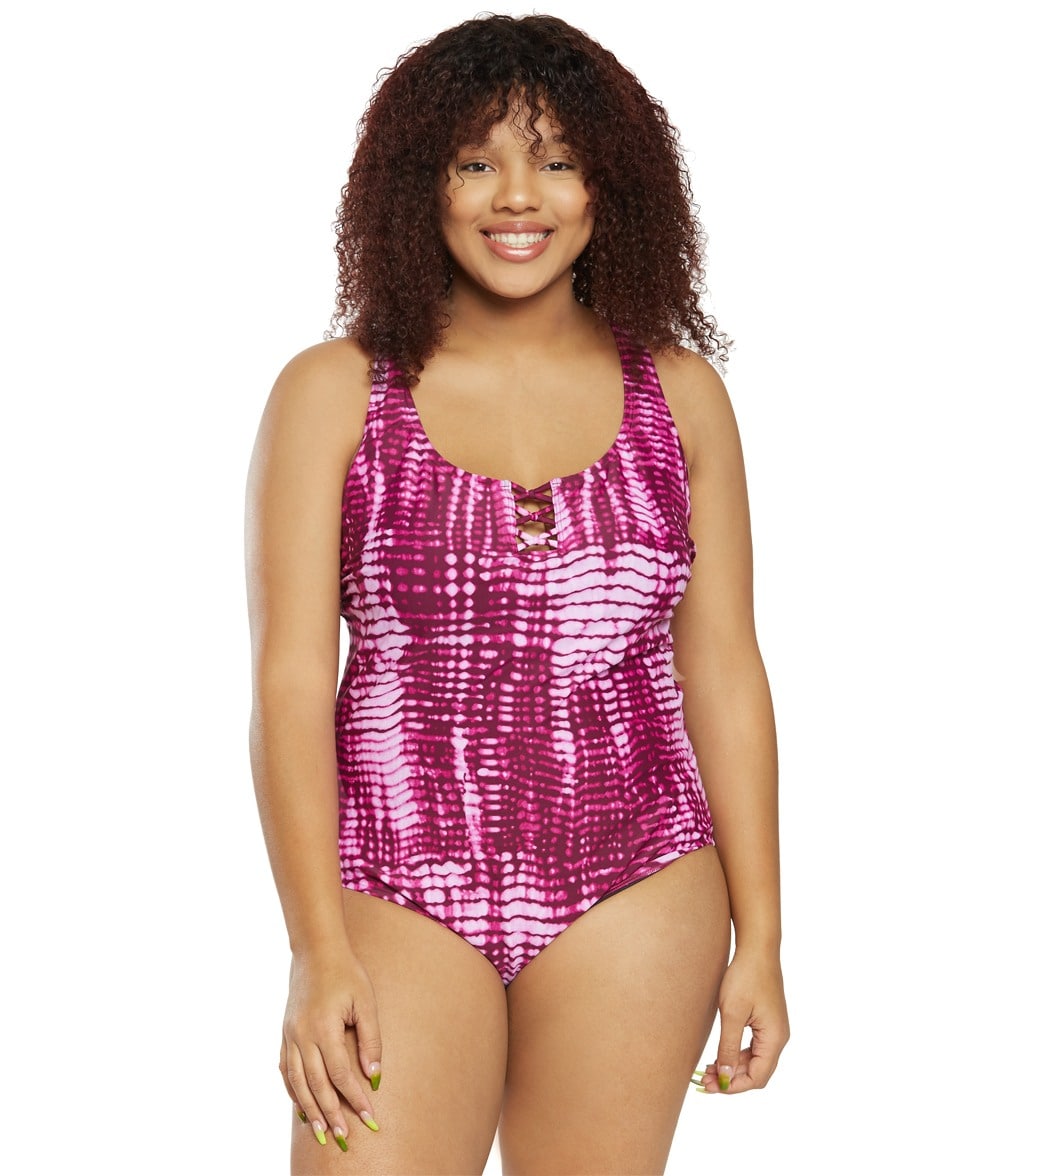 Speedo Plus Size Active Knotted Crisscross Chlorine Resistant One